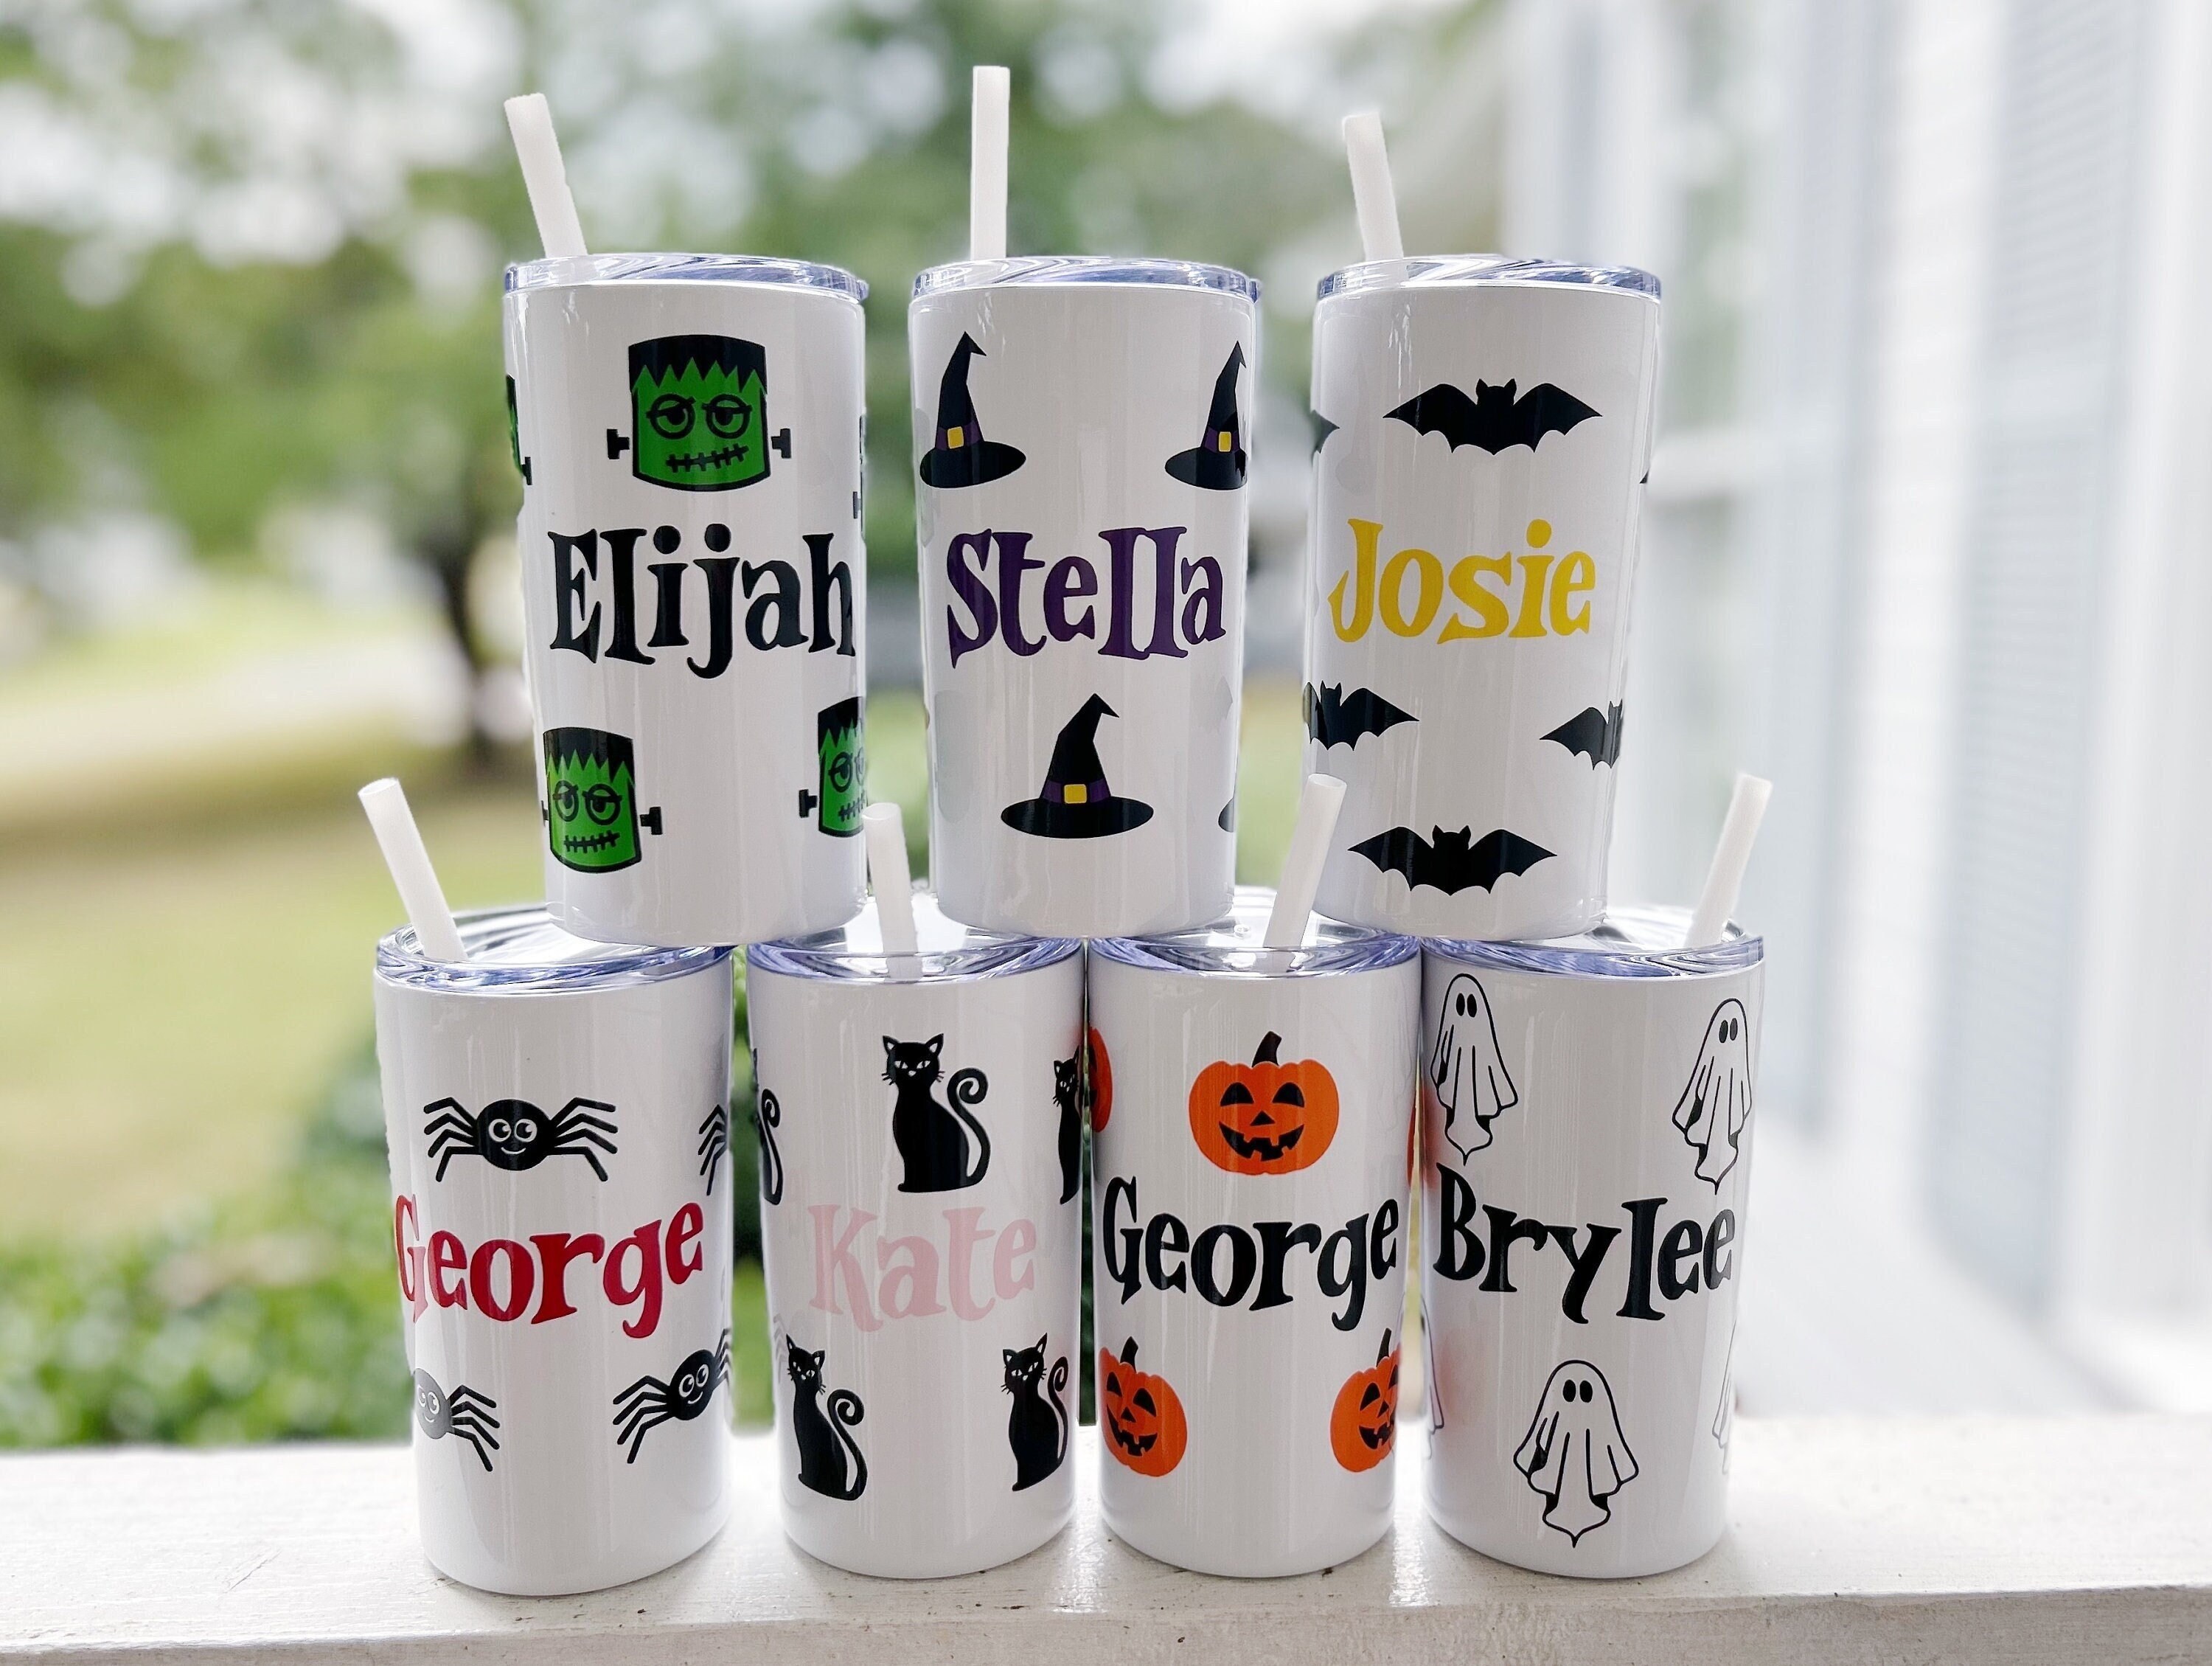 5 Packs Halloween Color Changing Cups with Lids and Straws - Halloween  Decorations Indoor Home, 24oz/710ml Plastic Tumblers Bulk, Reusable Cups  with Dark Castle, Pumpkin Warrior, Flying Witch, Black Cat, Trick or